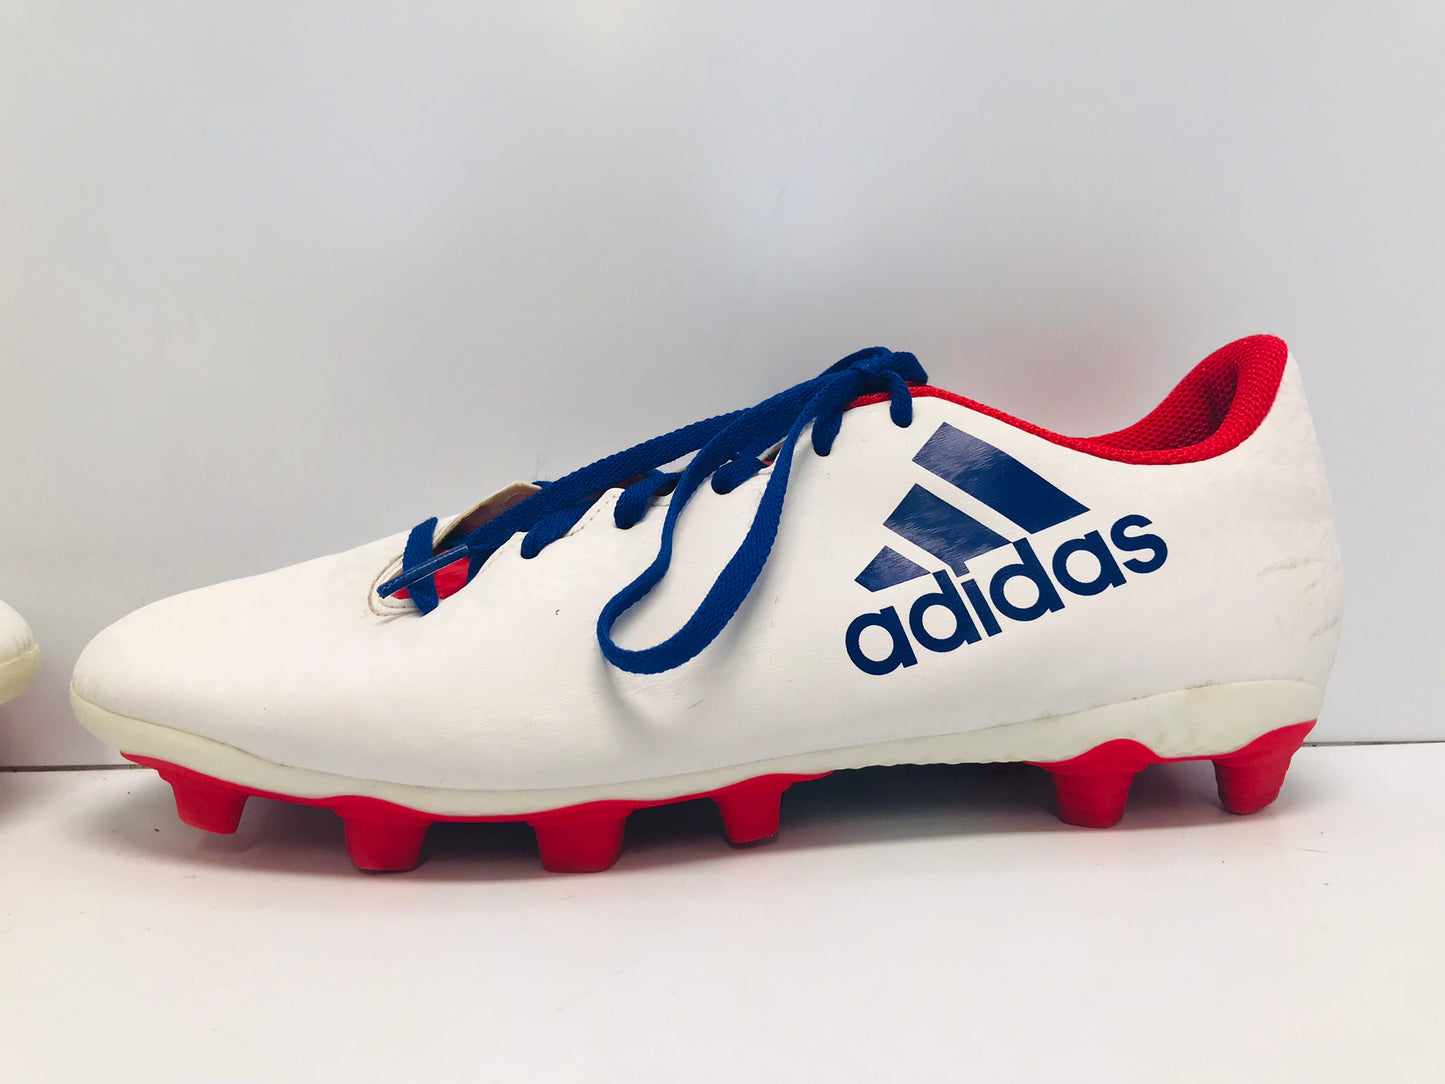 Soccer Shoes Cleats Men's Size 9.5 Adidas X White Red Blue Excellent